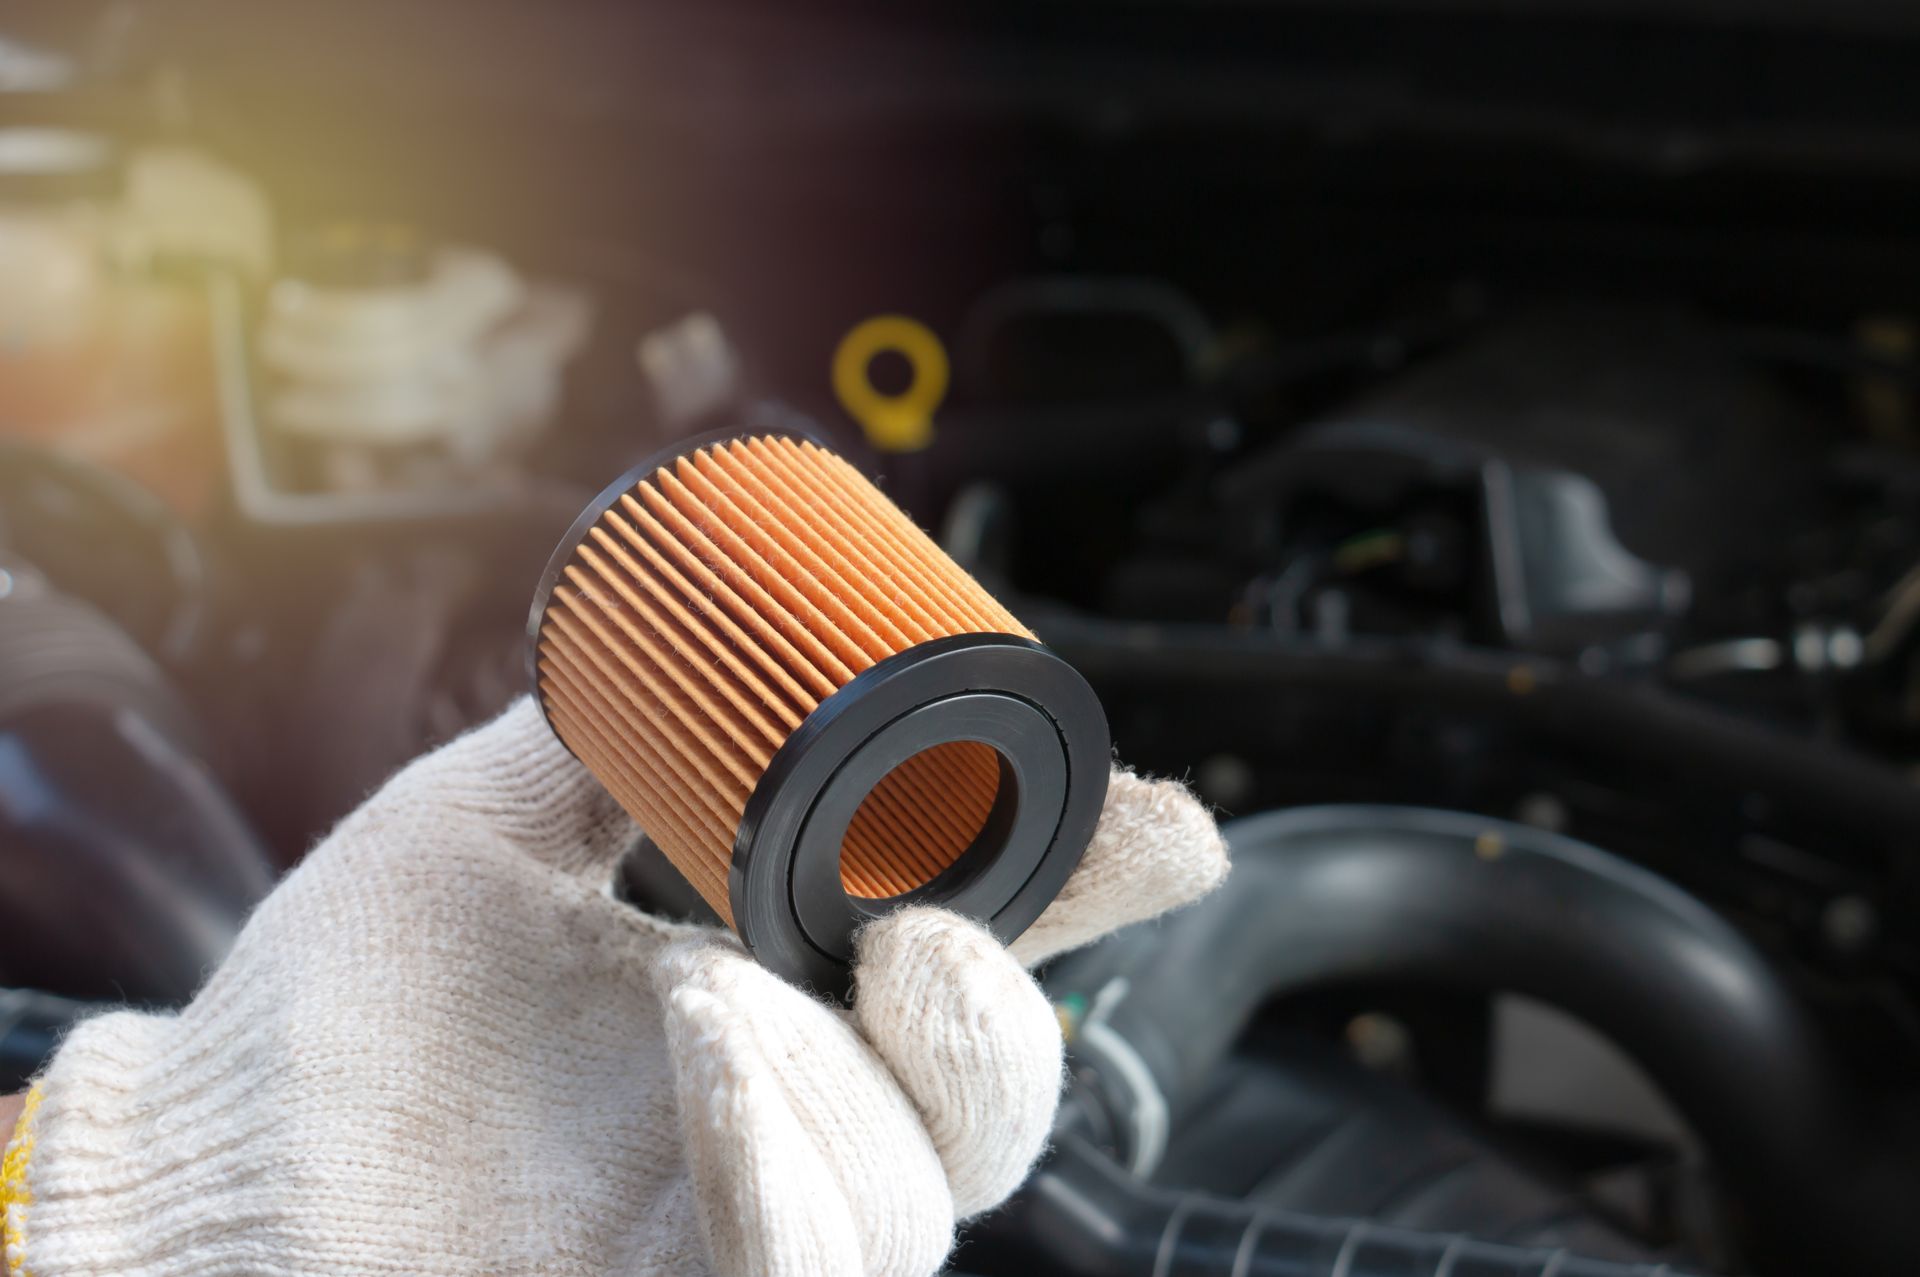 Fuel Filter Service at ﻿Brakes Tires & More﻿ in ﻿Yuba City, CA﻿